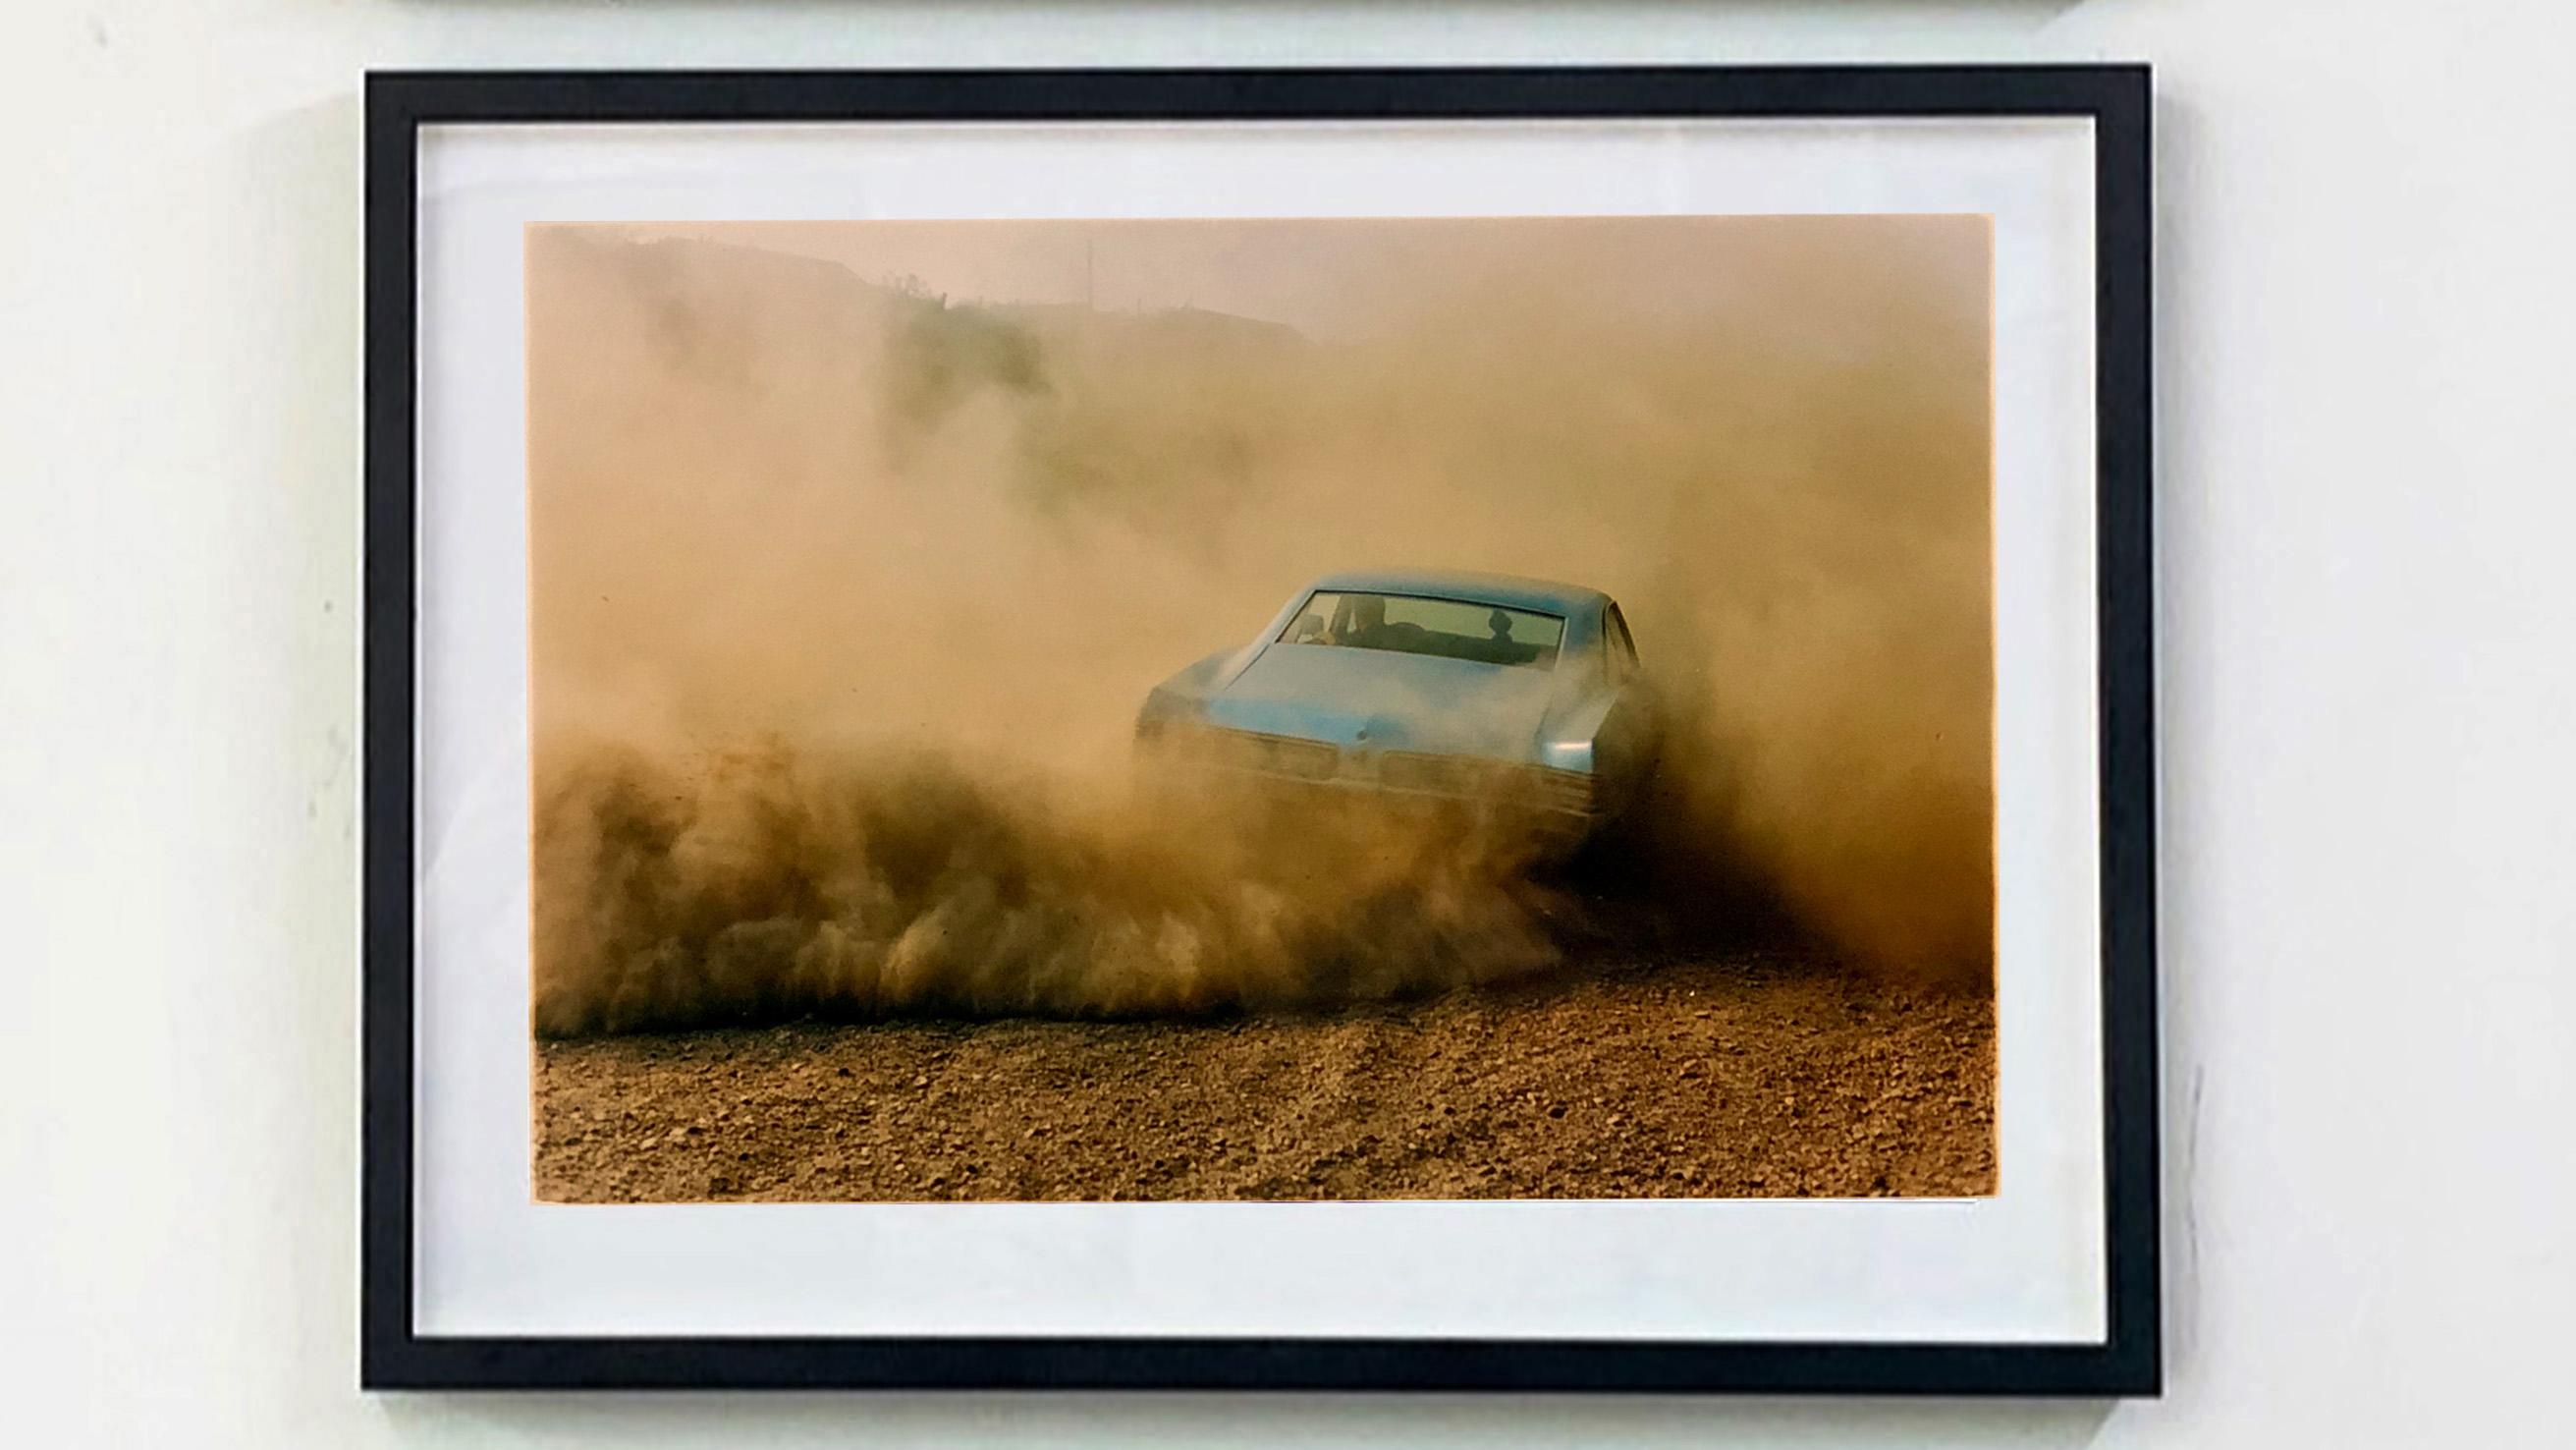 Buick in the Dust, Hemsby, Norfolk - Color Photography Triptych 3